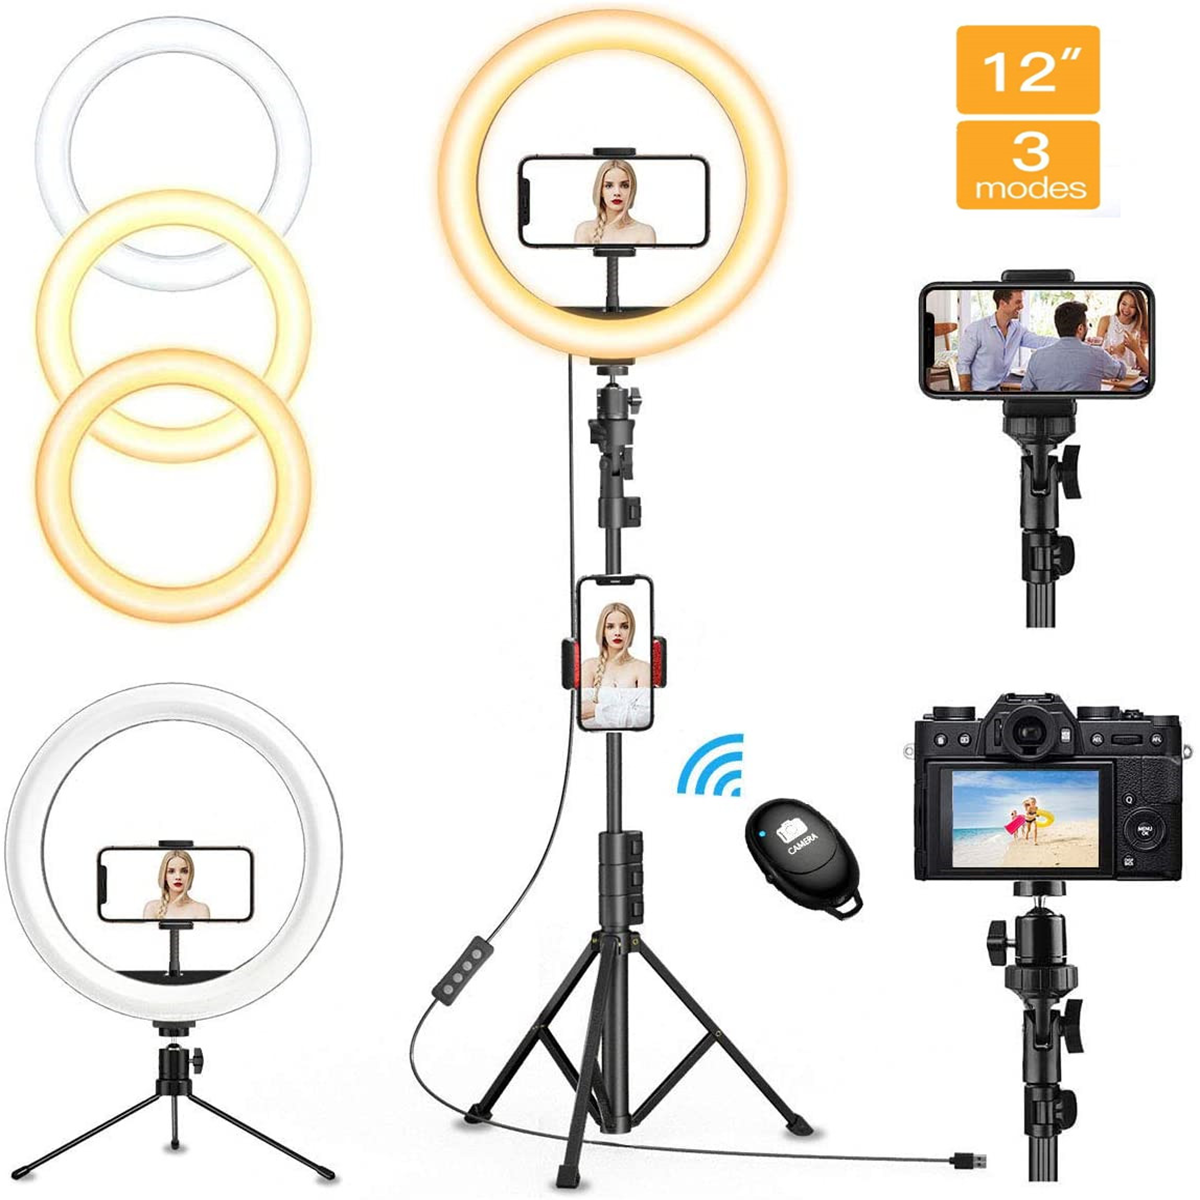 Selfie Ring Light for iPhone Android 3 Light Modes /& 10 Brightness Level YouTube Video Live Stream Makeup Photography LED Ring Light 10 with Tripod Stand /& Phone Holder